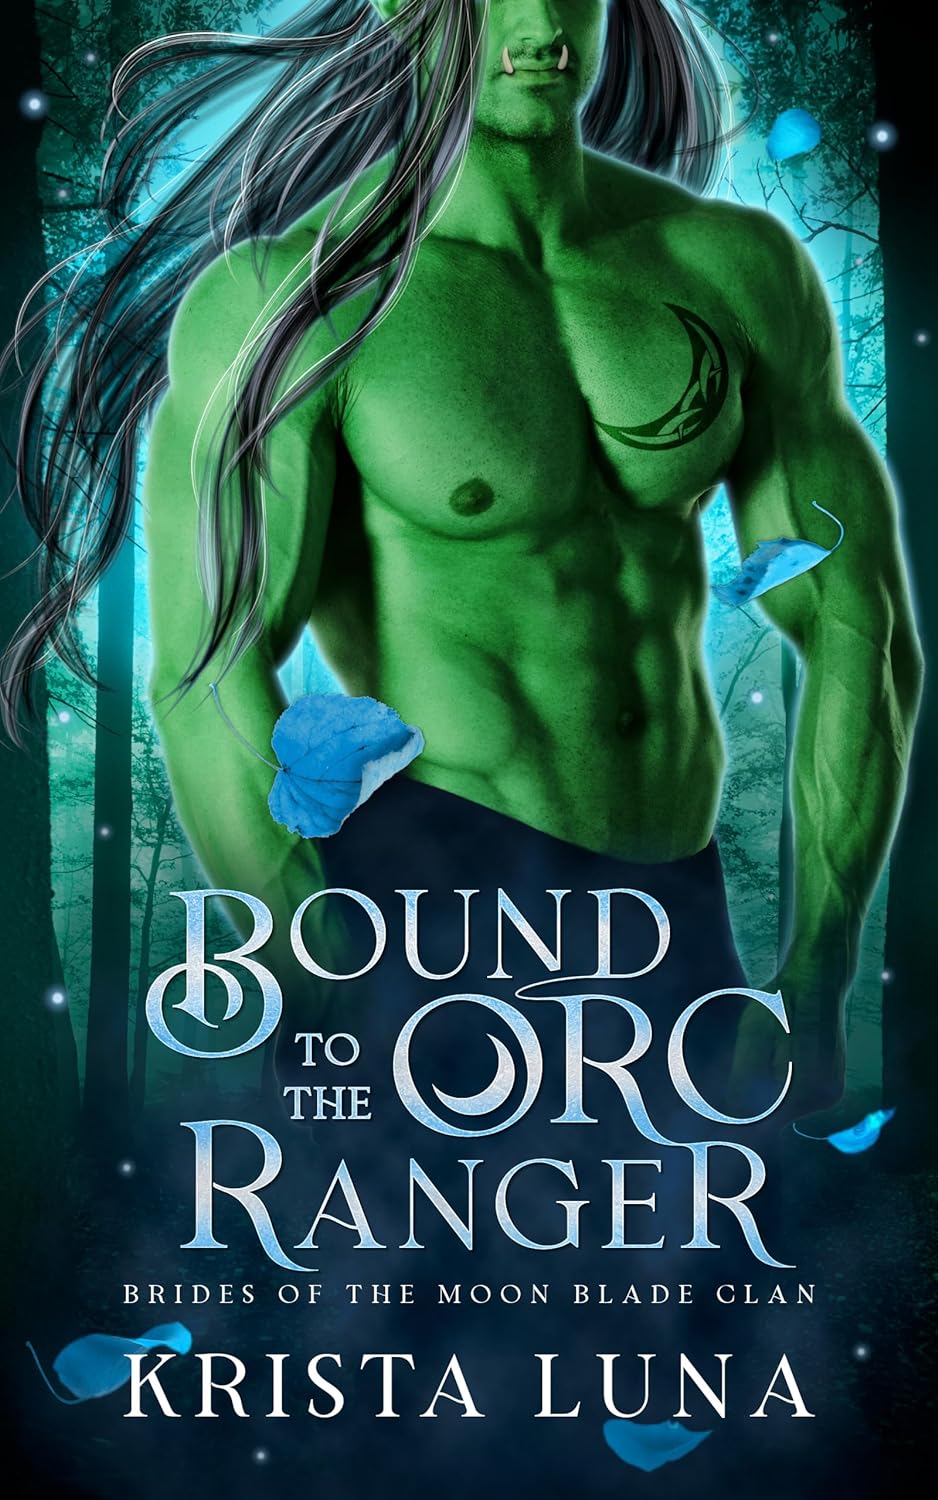 Bound to the Orc Ranger by Krista Luna